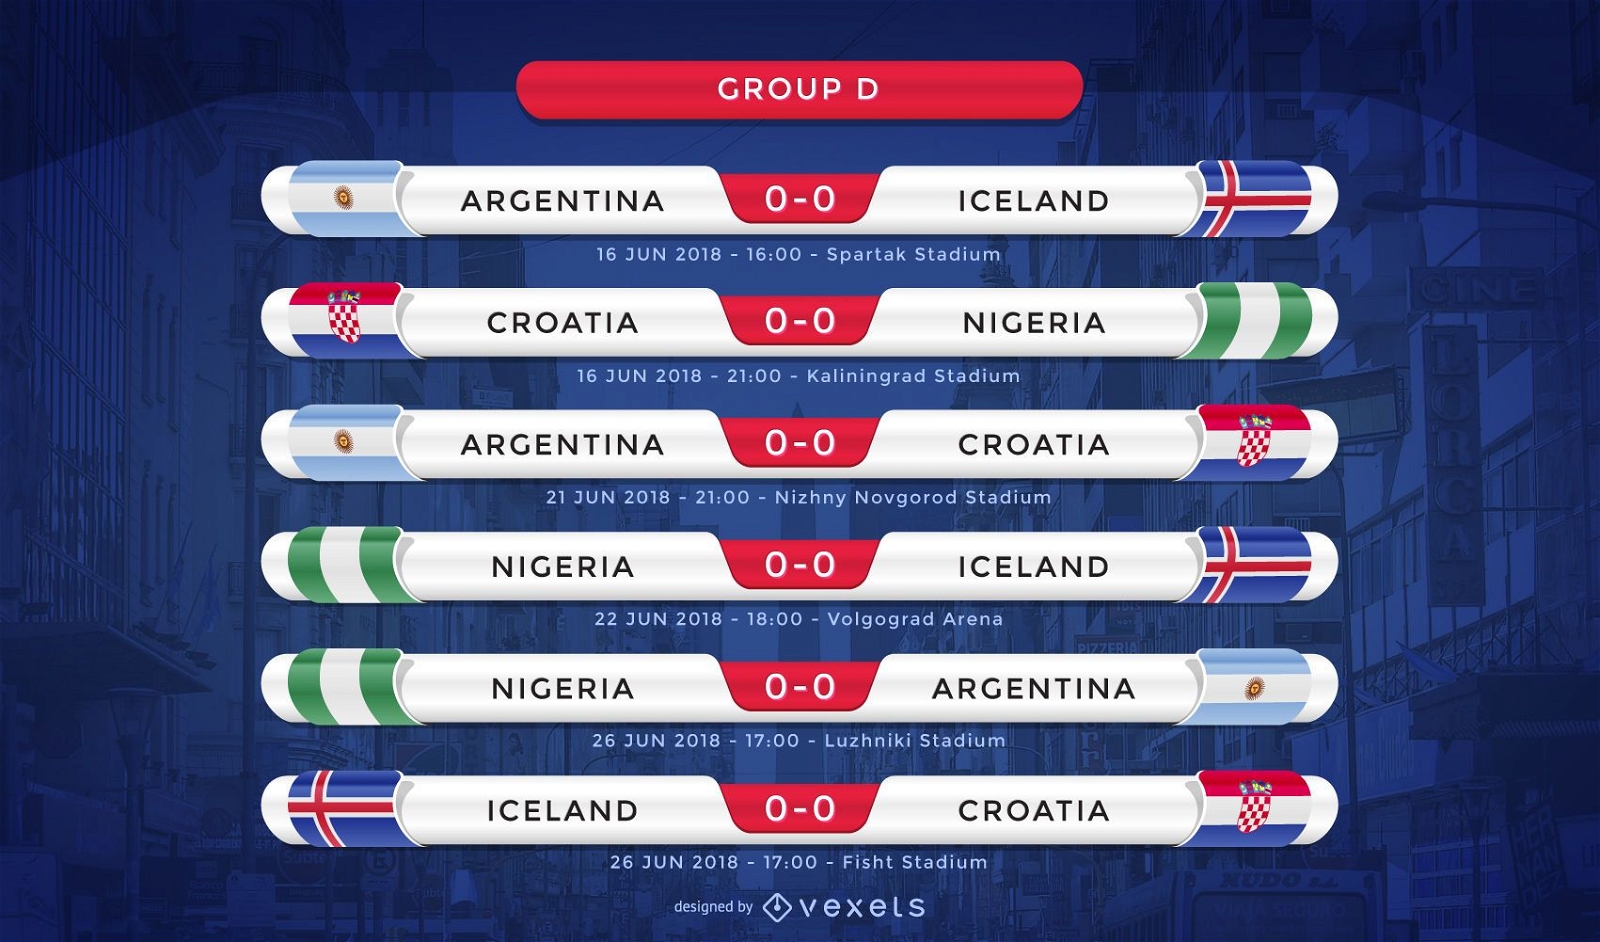 Russia 2018 group D fixture